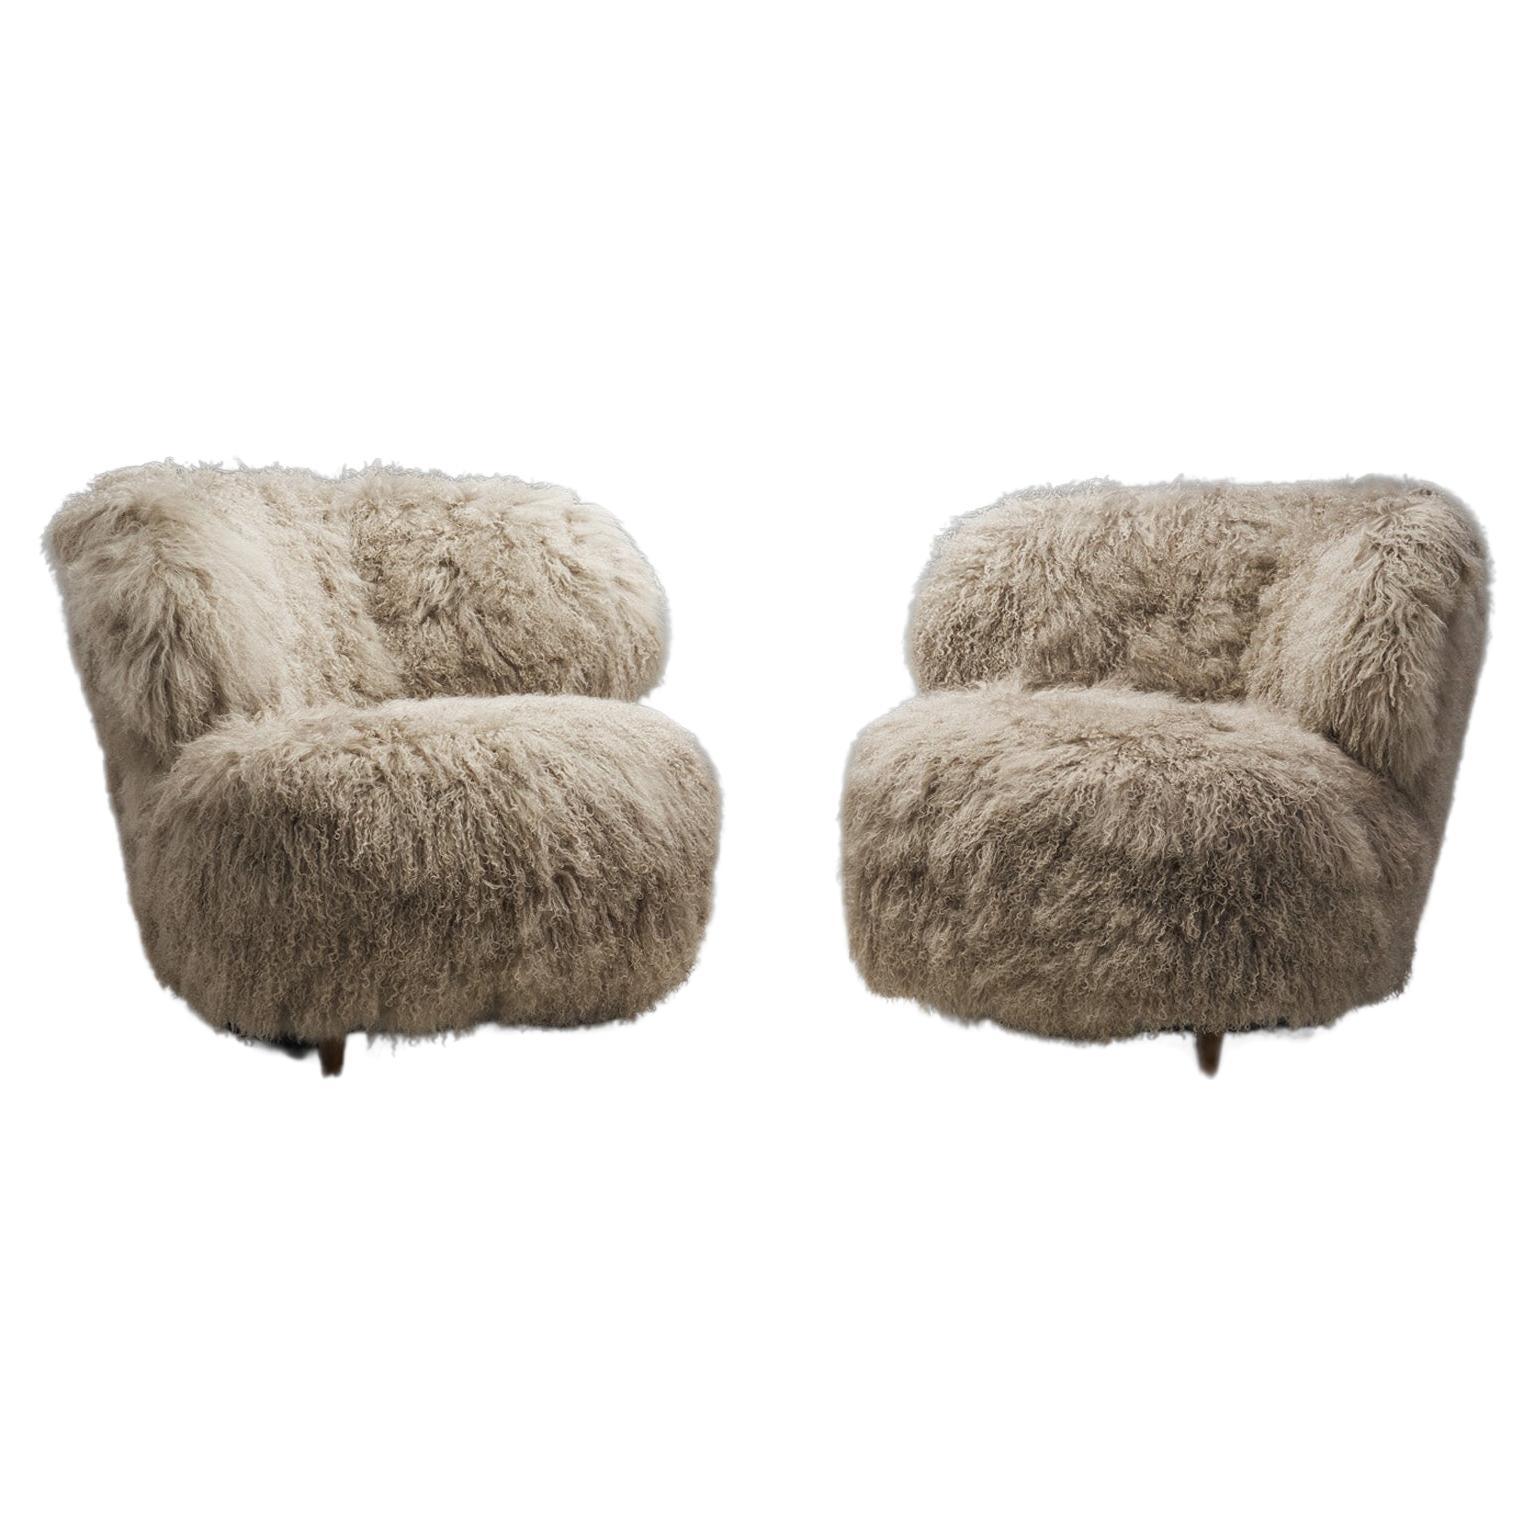 Nordic Modern Lounge Chairs in Mongolian Shearling, Finland ca 1950s For Sale